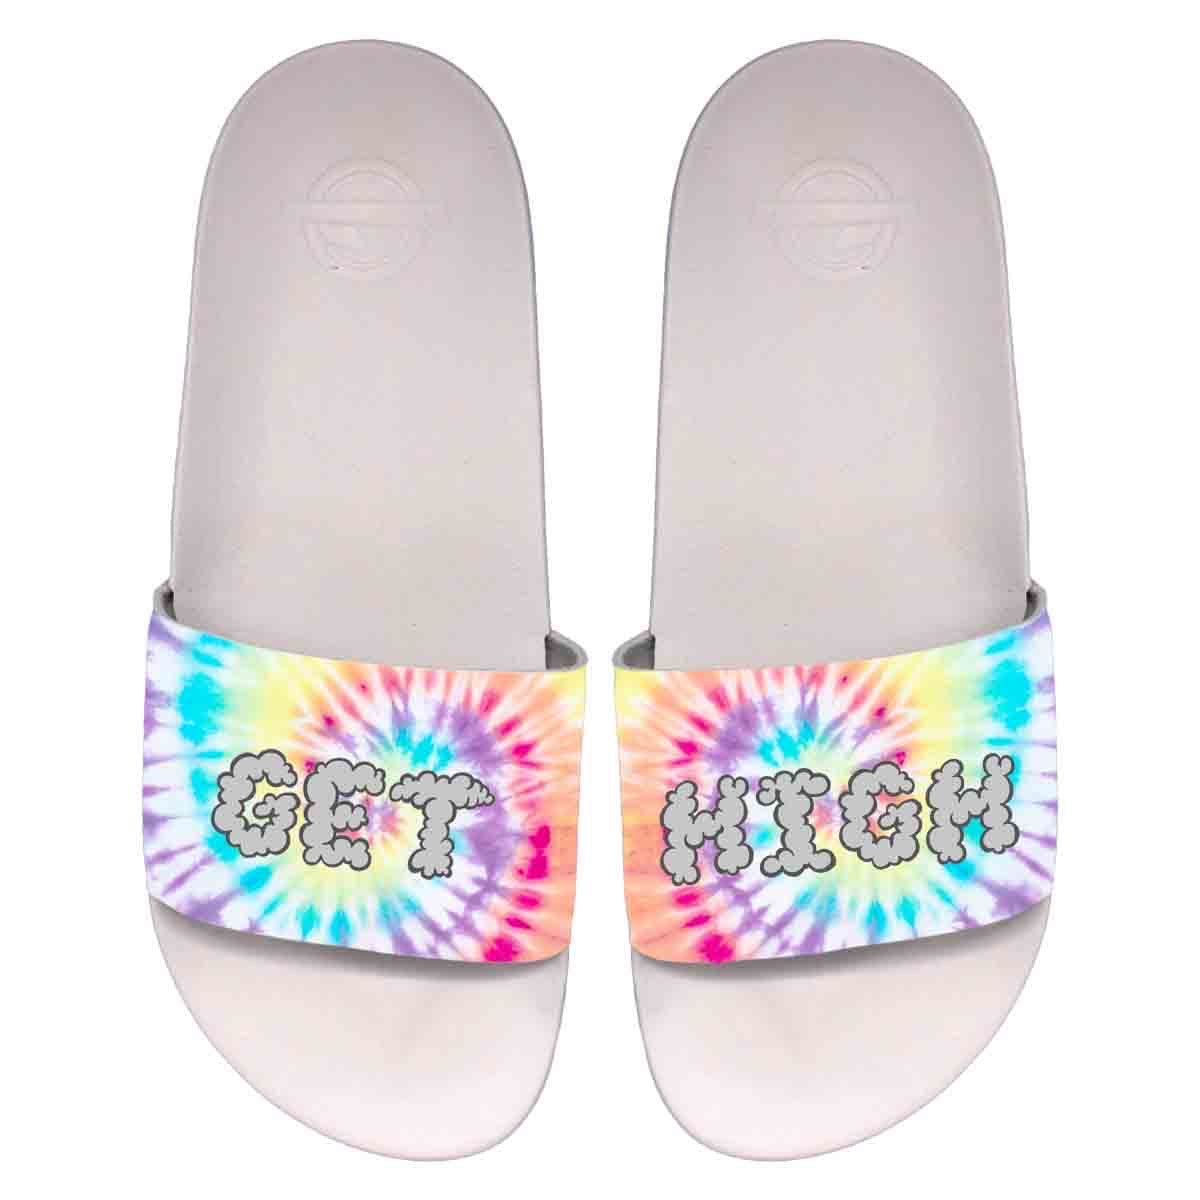 MAV Glass Get High Slides with colorful tie-dye design, top view on white background